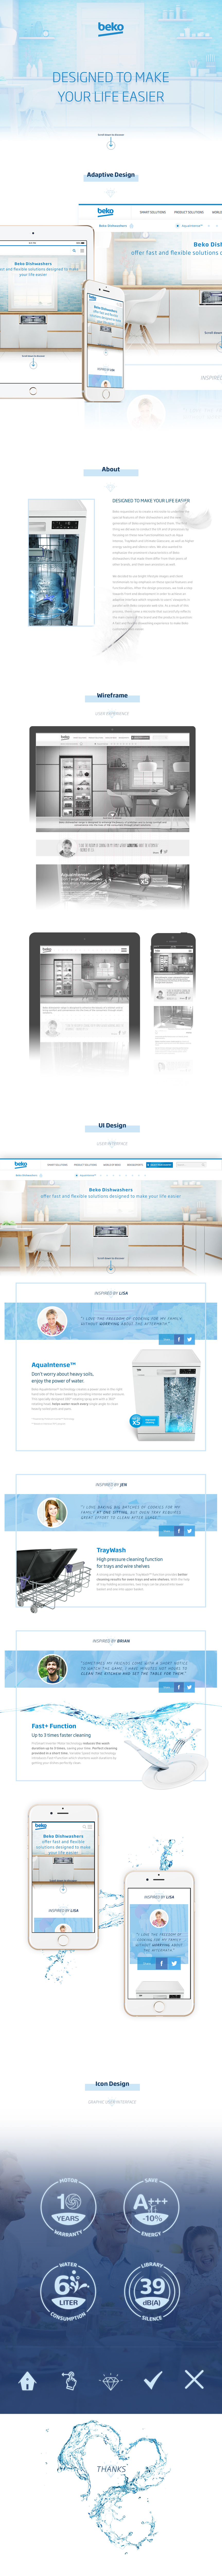 microsite user experience ux user interface UI interaction One page Adaptive marketing  